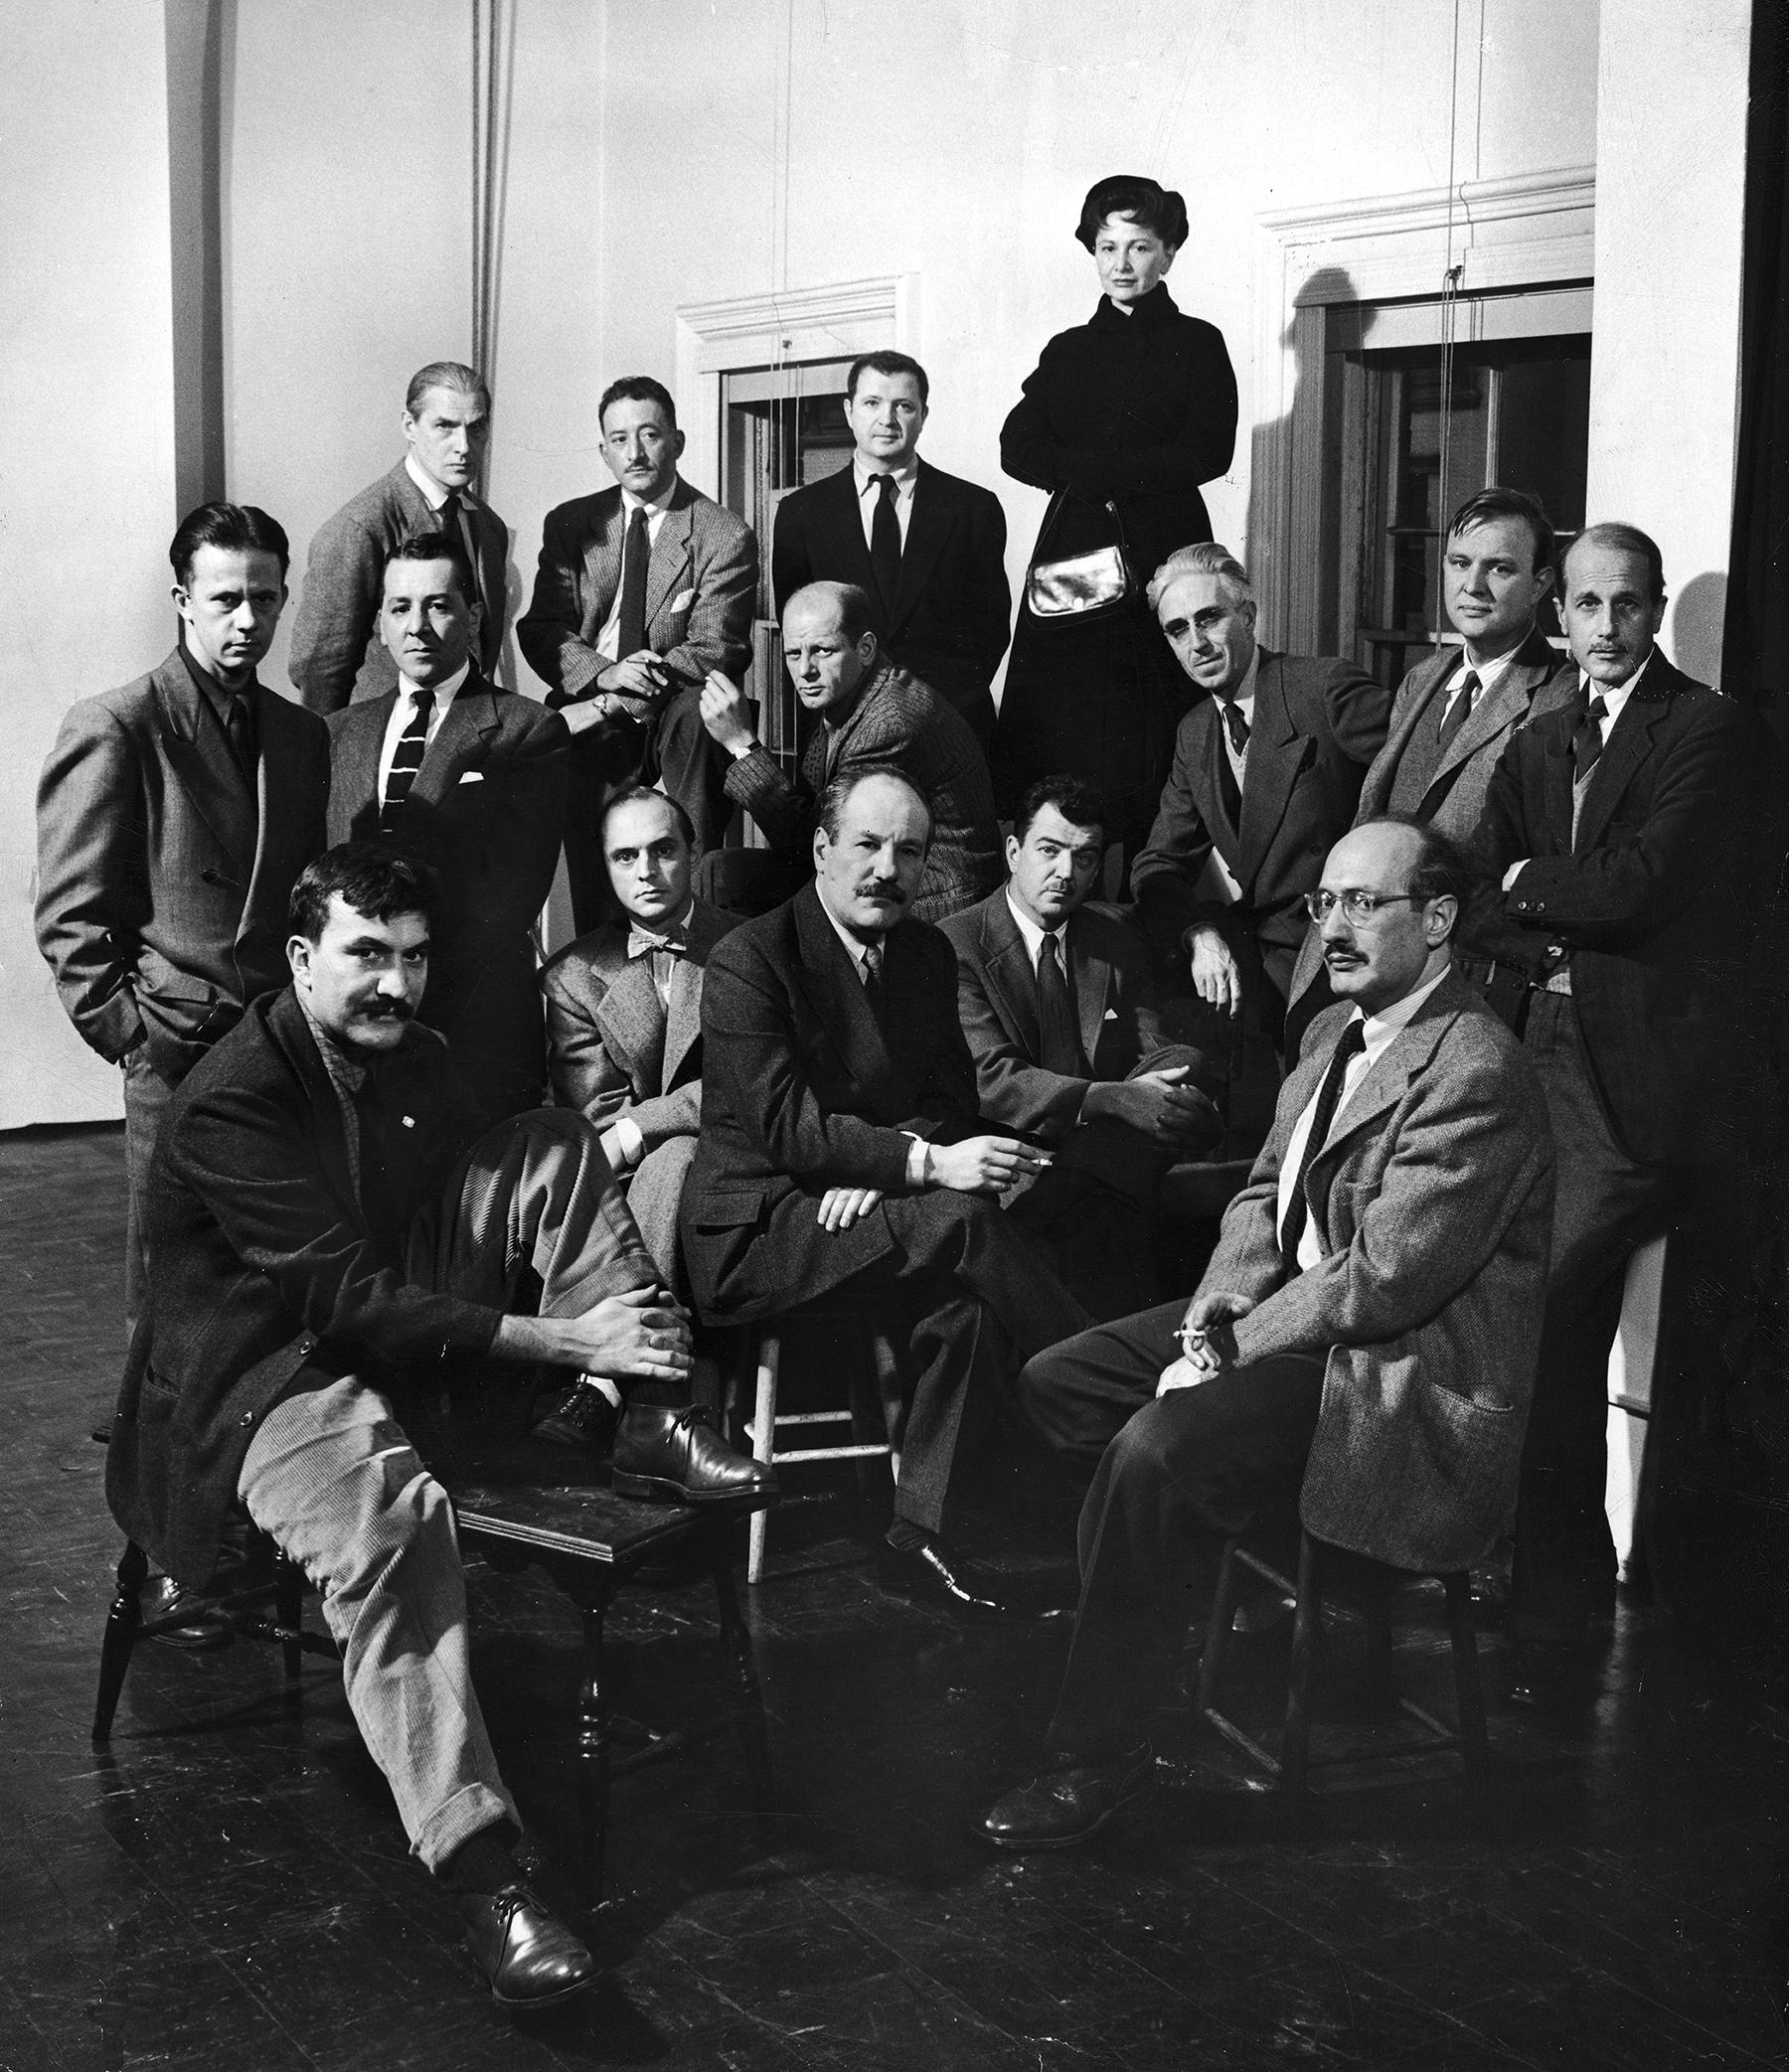 Nina Leen Black and White Photograph - The Irascibles: Group Portrait of American Expressionists, New York